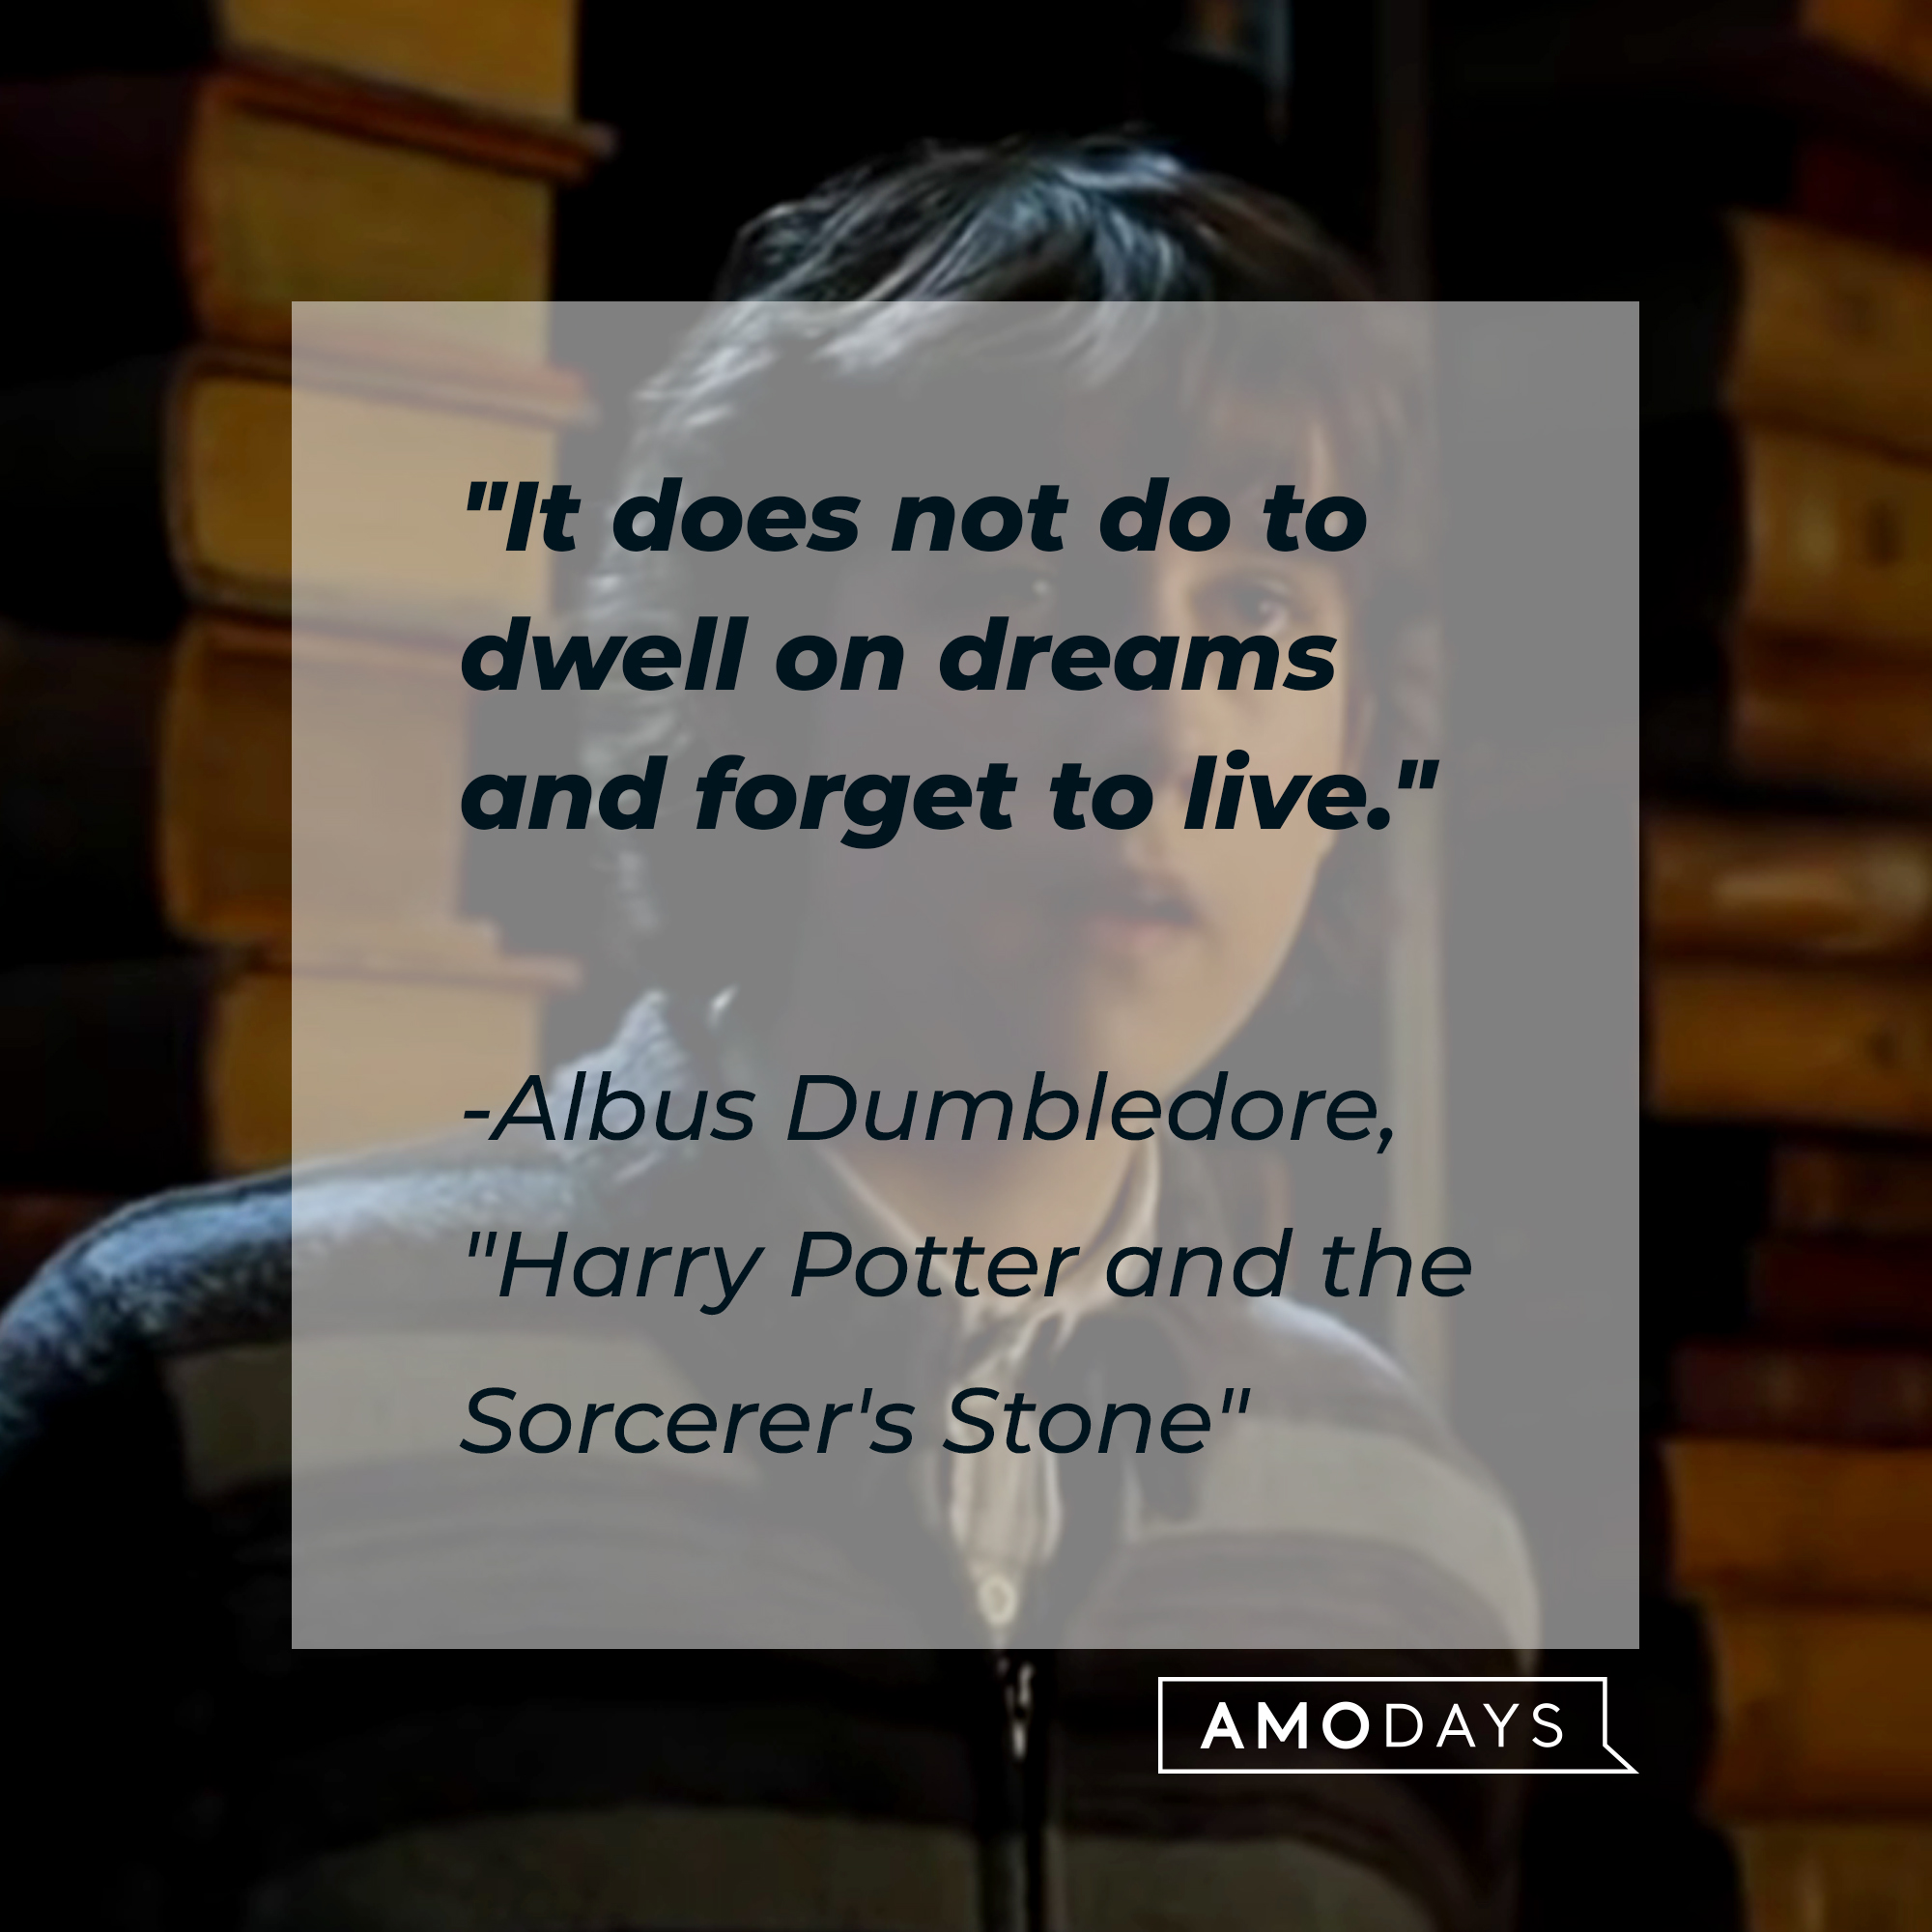 Neville Longbottom with his Albus Dumbledore's quote: "It does not do to dwell on dreams and forget to live." | Source: Facebook.com/harrypotter